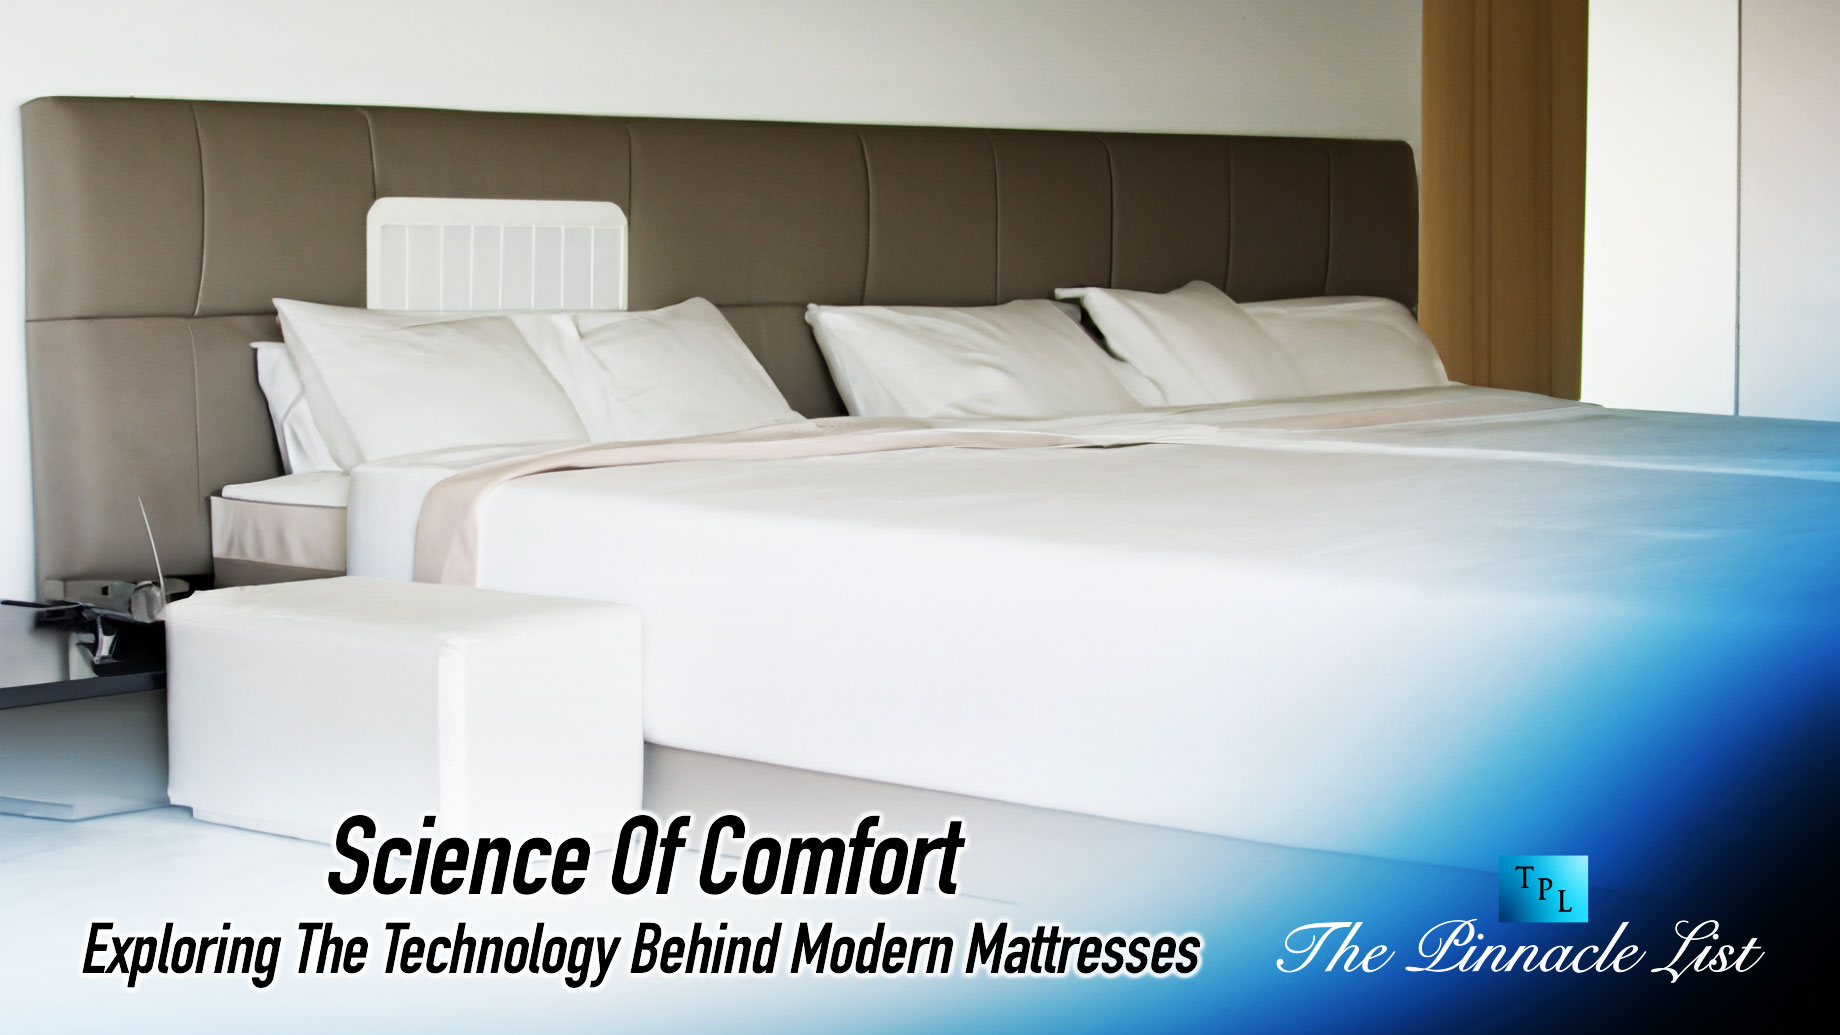 Science Of Comfort: Exploring The Technology Behind Modern Mattresses